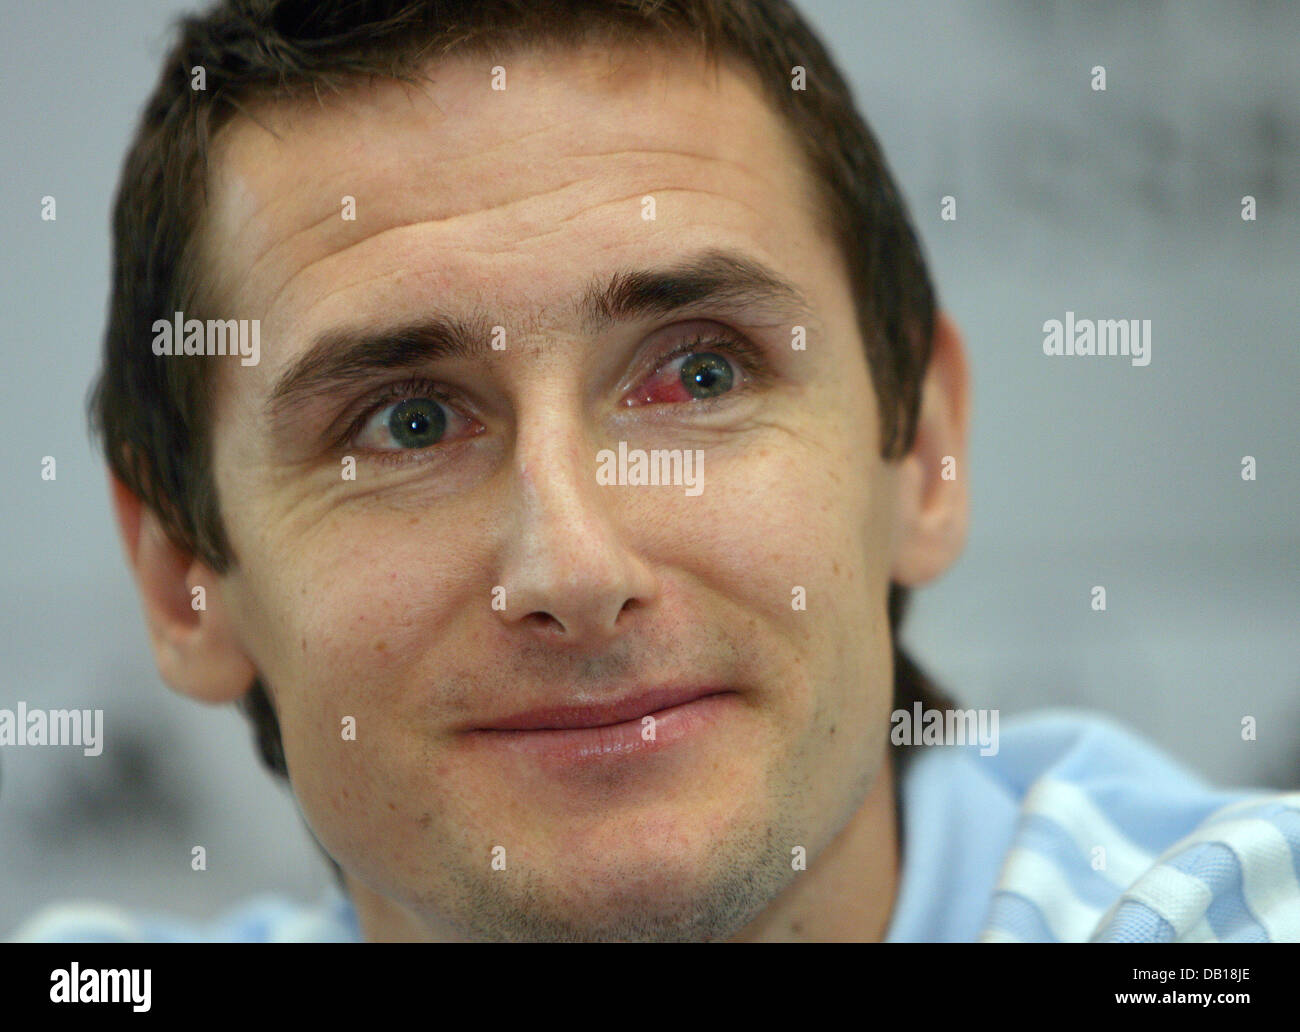 German national soccer player Miroslav Klose, answers journalists' questions during a press conference held at the German Football Federation's (DFB) headquarters in Frankfurt Main, Germany, 19 November 2007. Photo: UWE ANSPACH Stock Photo